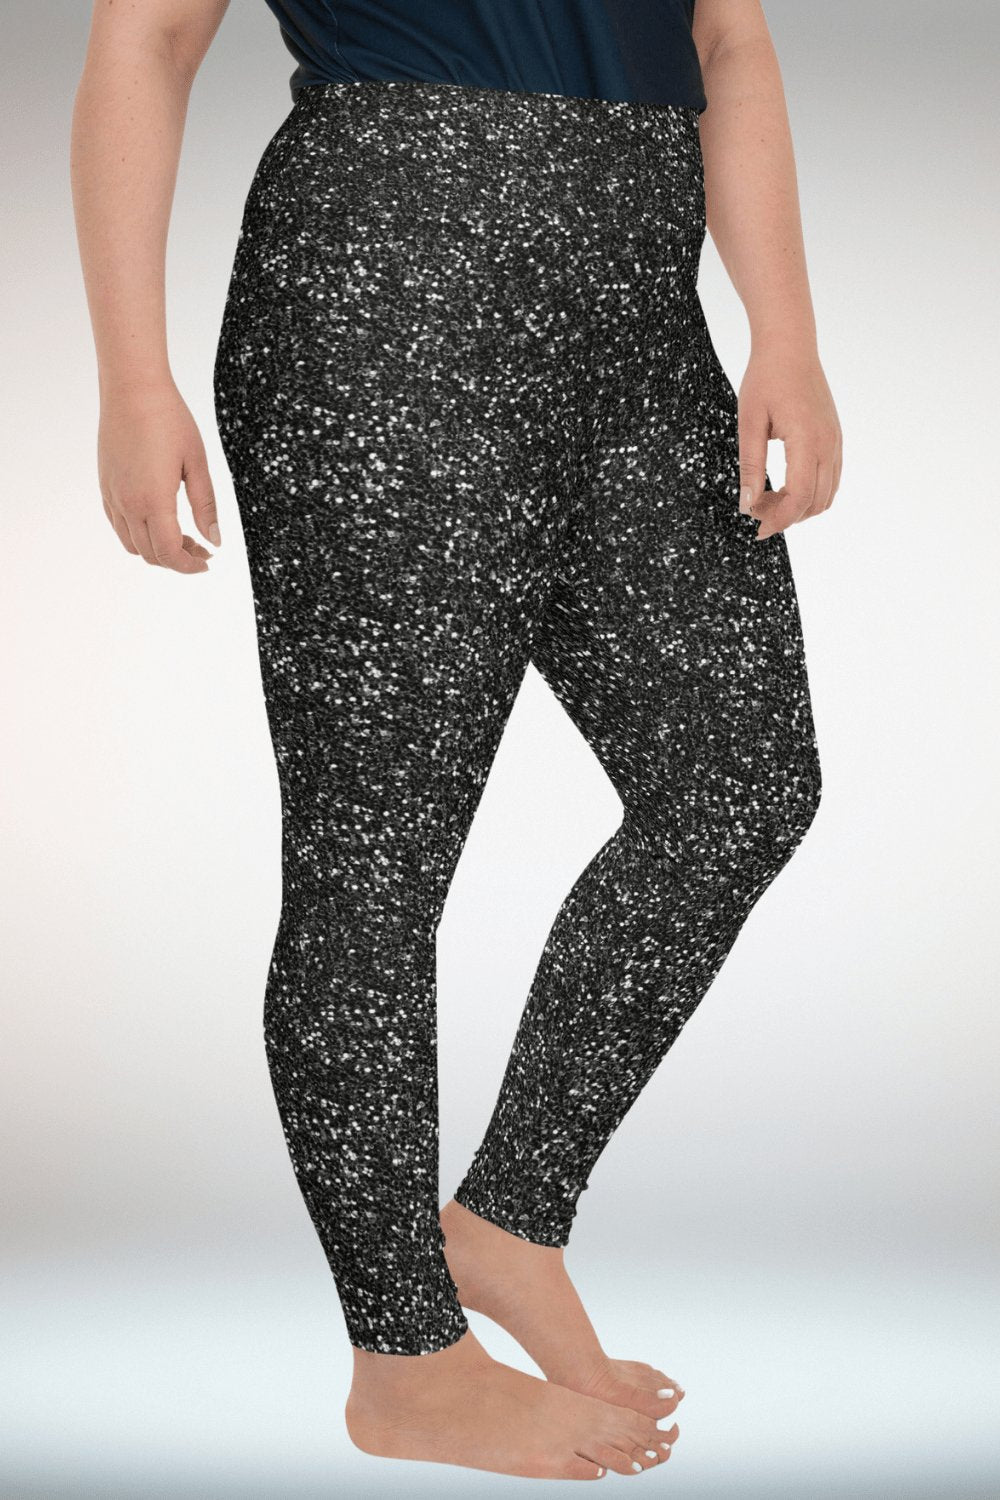 Uillui Sequin Disco Pants Women's Sexy Glitter Sparkle High Waisted Leggings  Stretch Slim Pencil Pant 70s Club Party Outfits Black at Amazon Women's  Clothing store